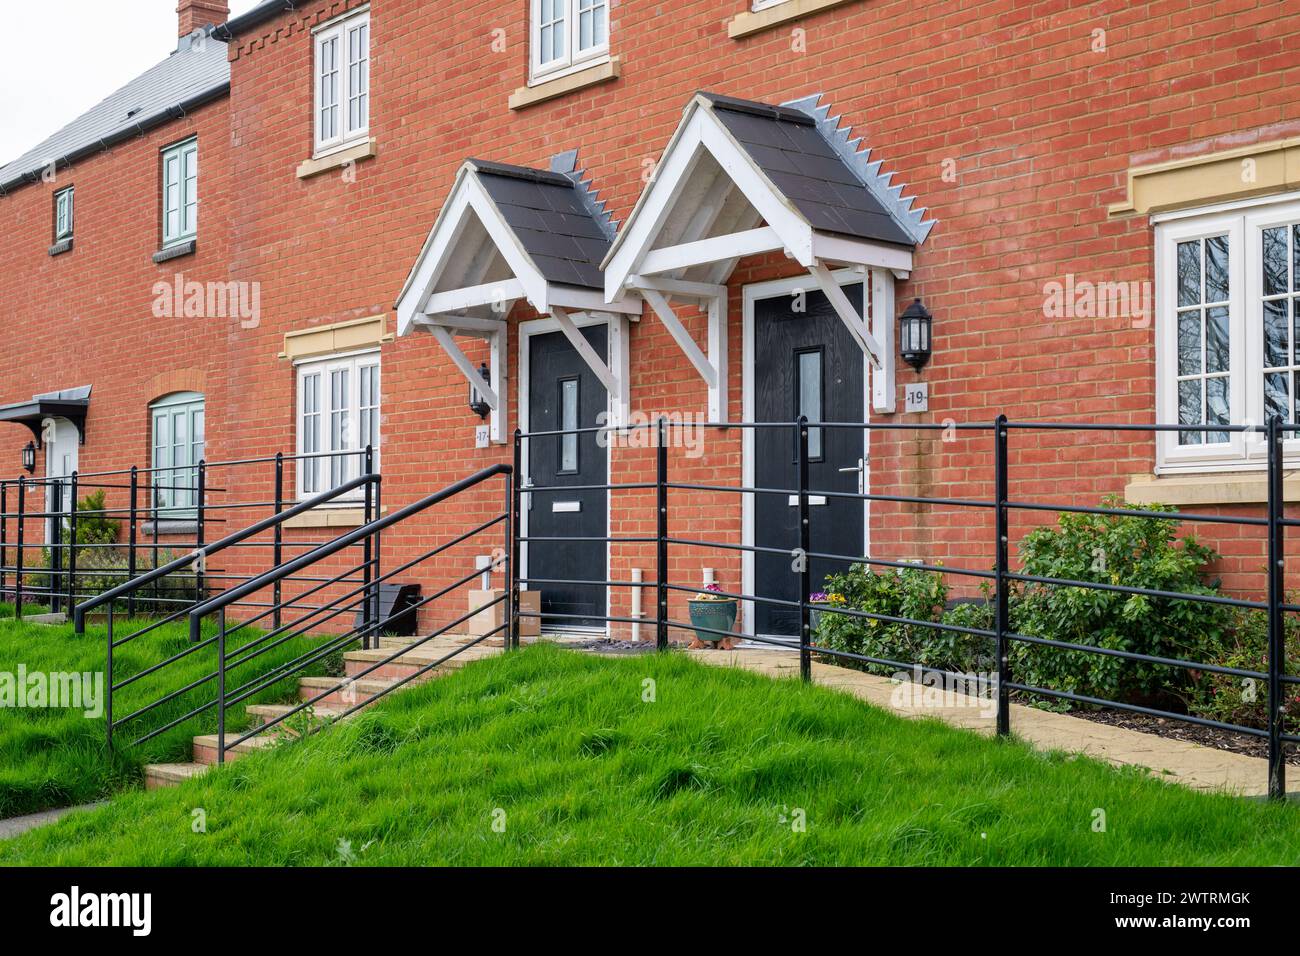 Town houses in Brackley, Northamptonshire, England Stock Photo